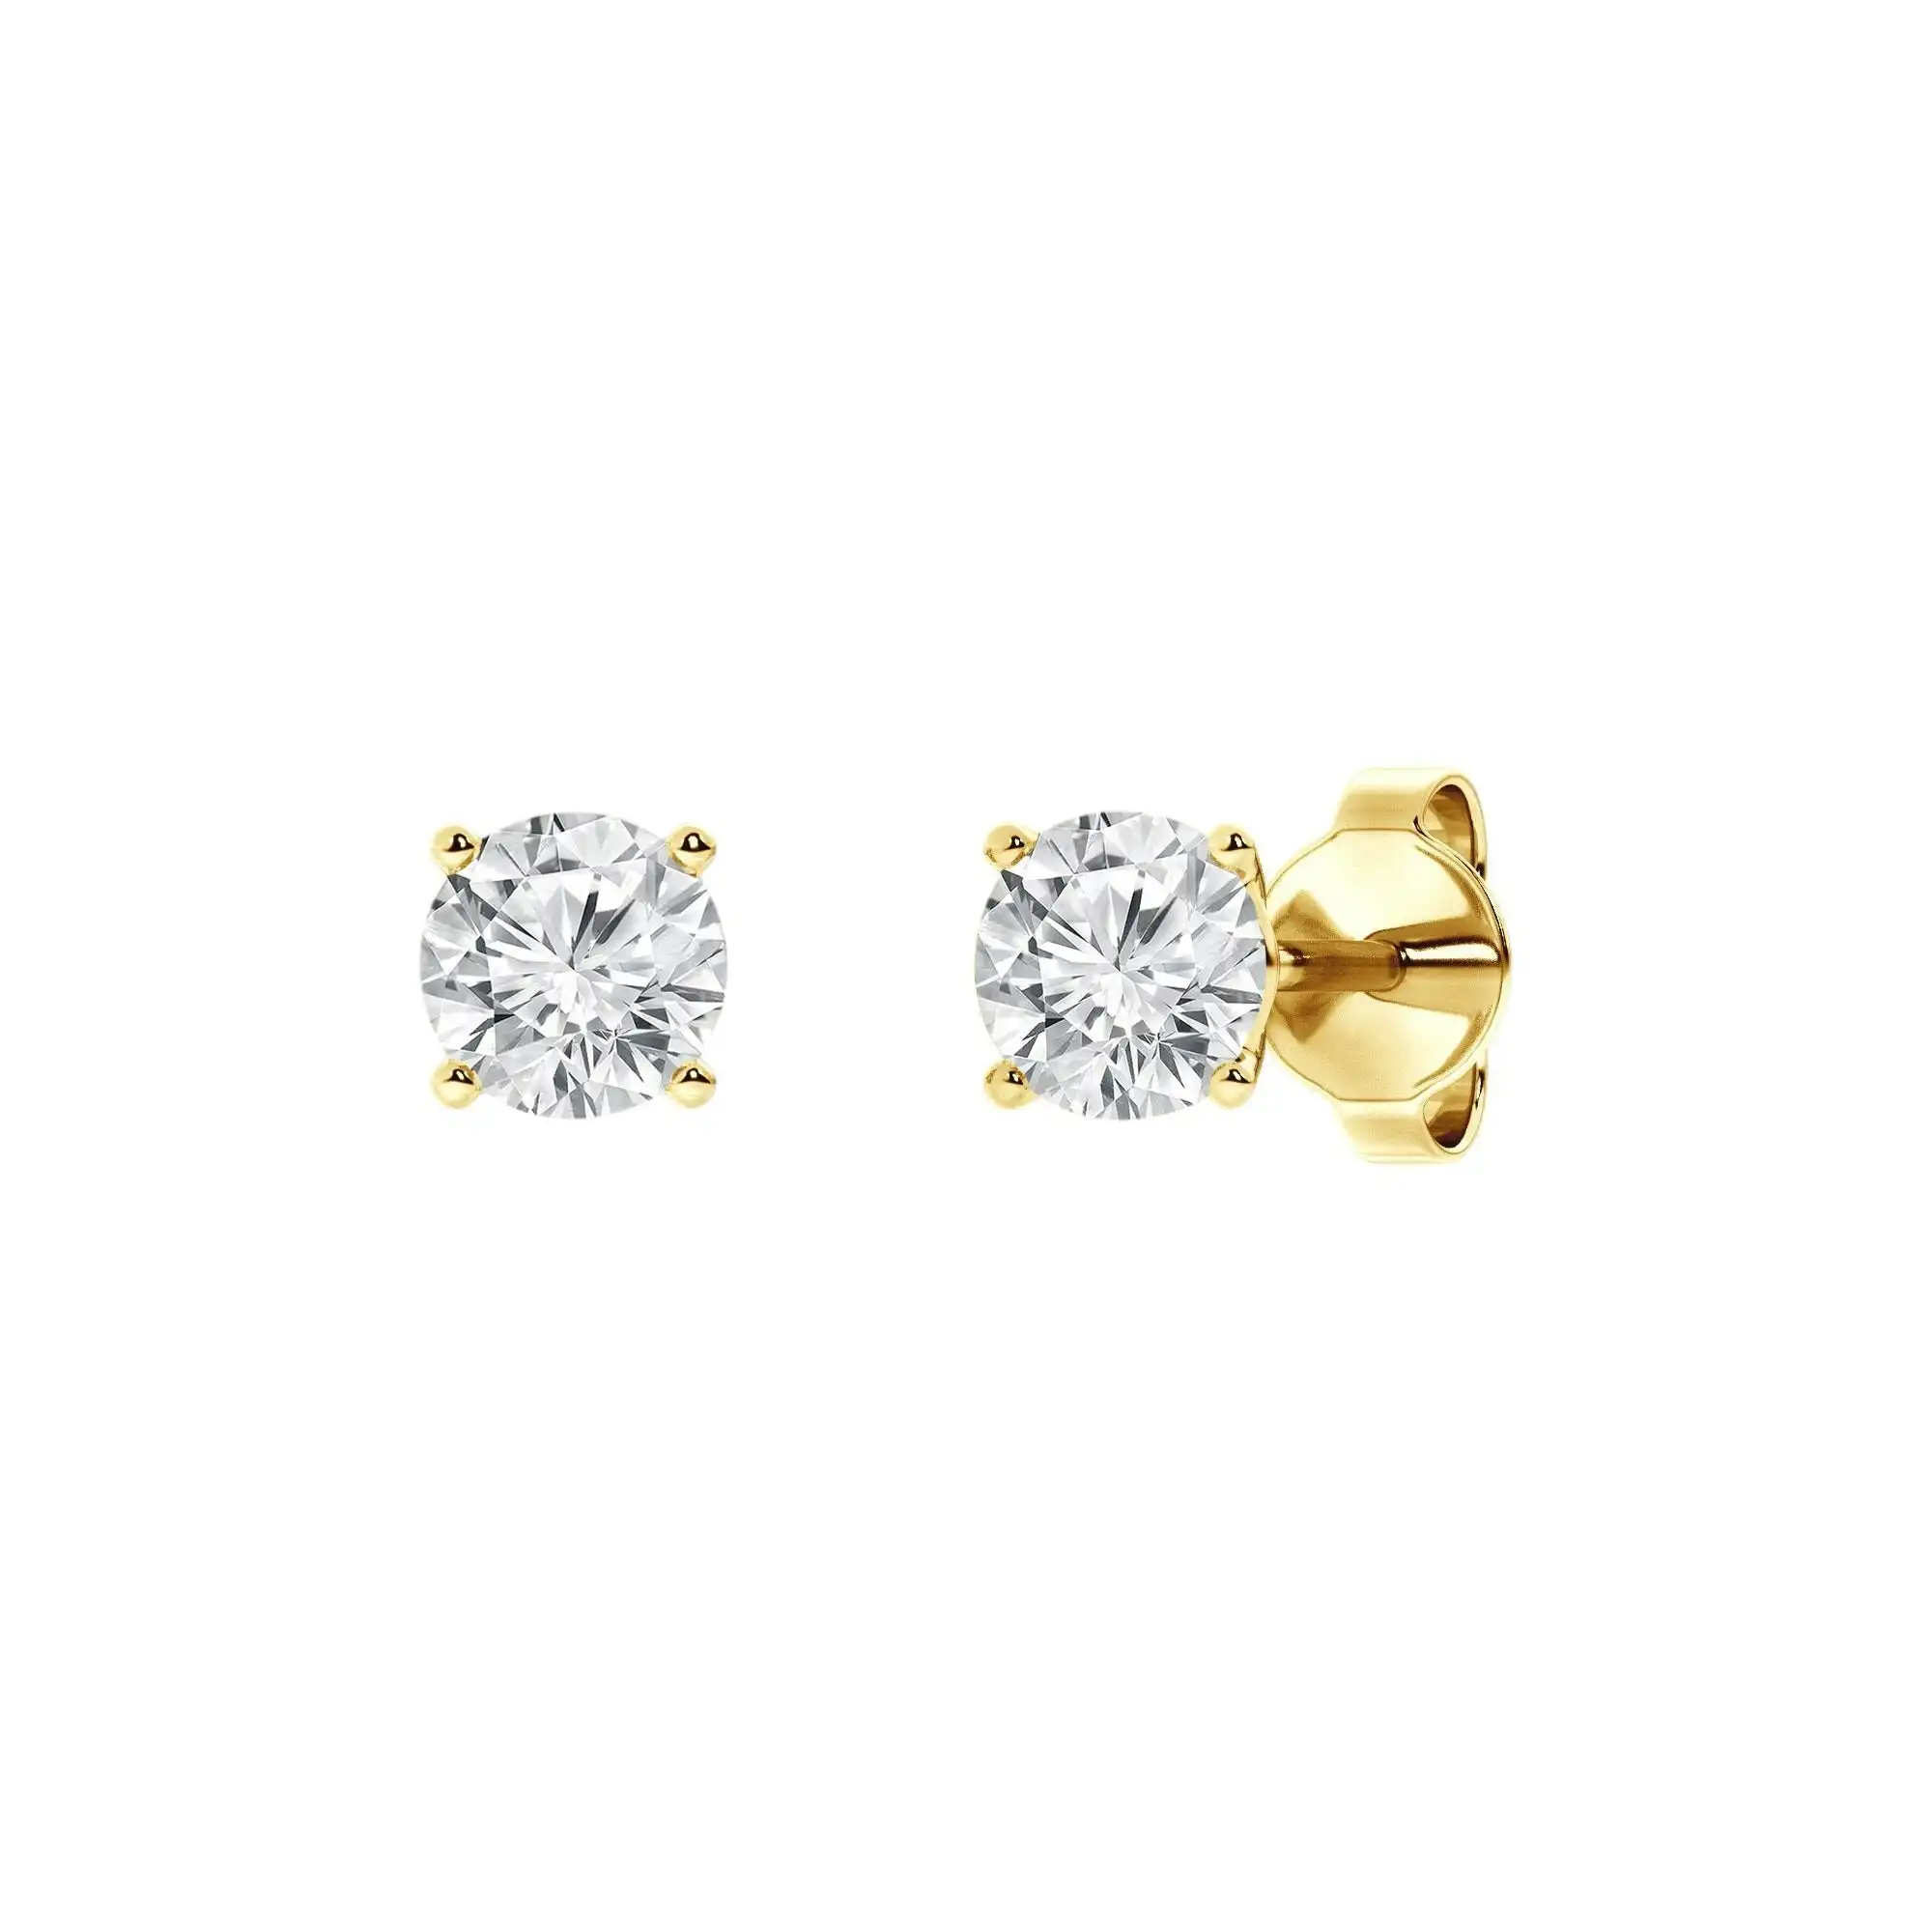 Meera 1/3ct Laboratory Grown Diamond Solitaire Earrings in 9ct Yellow Gold